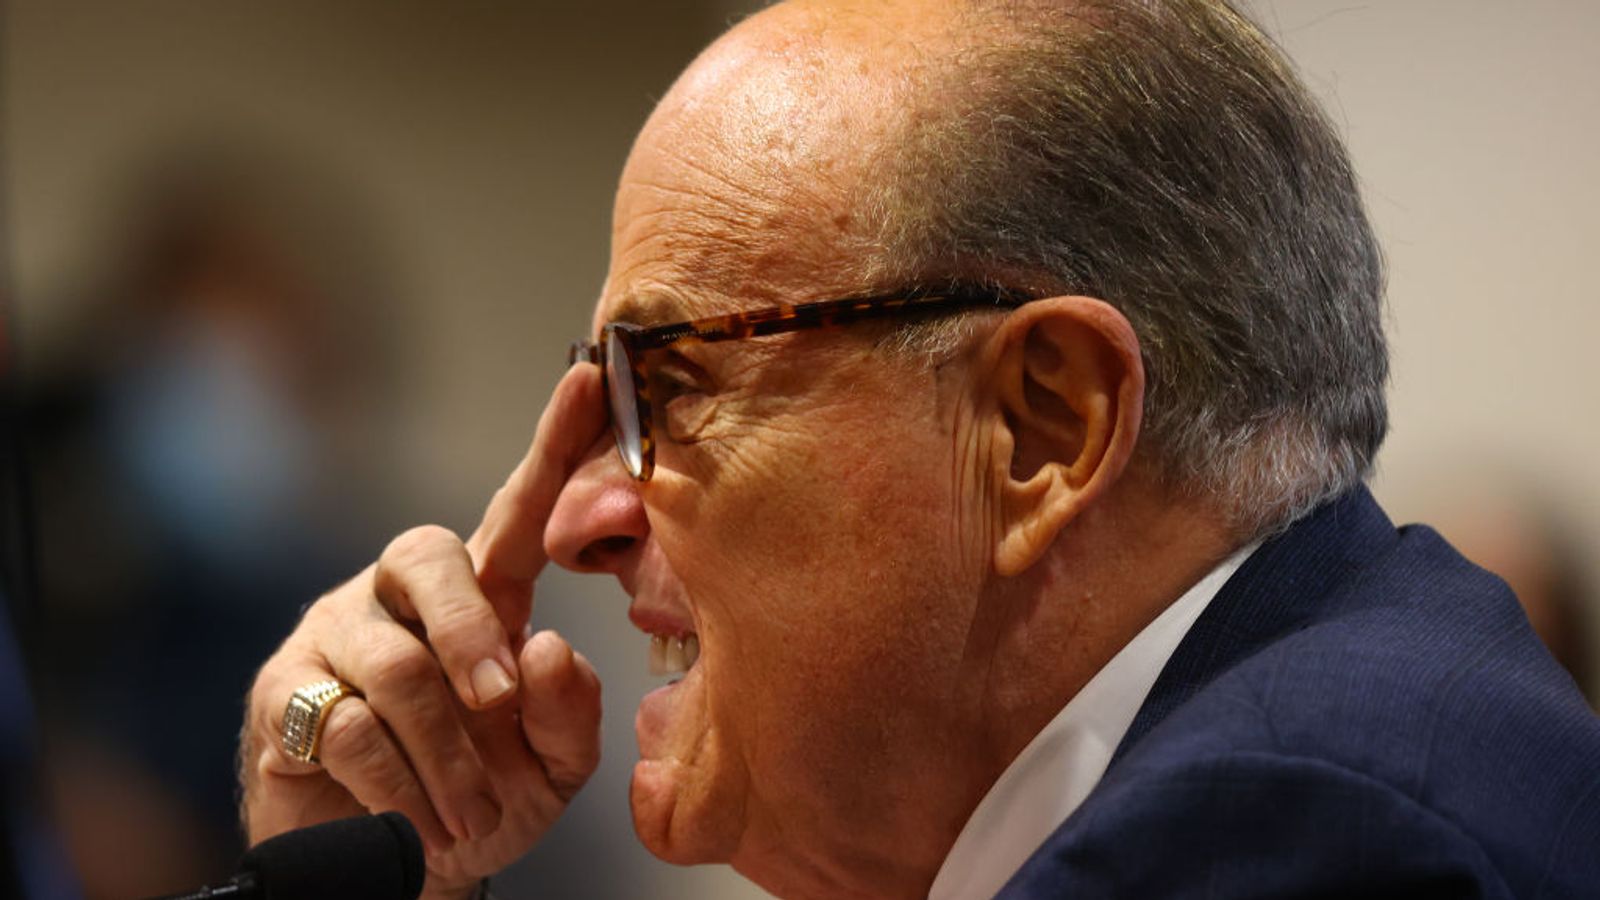 COVID-19: Rudy Giuliani says he's 'recovering quickly ...